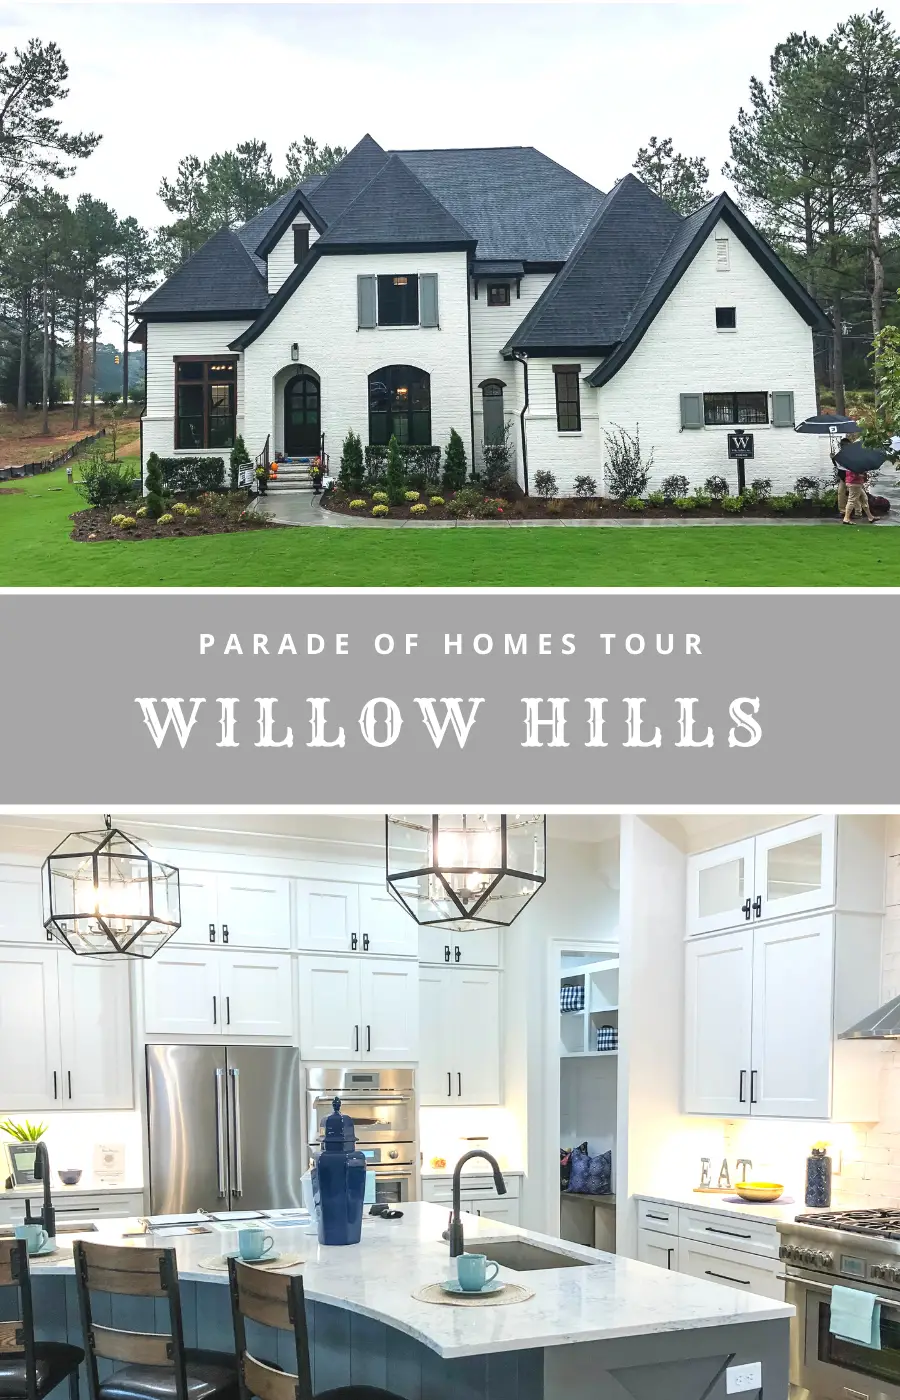 Willow Hills Parade of Homes Tour